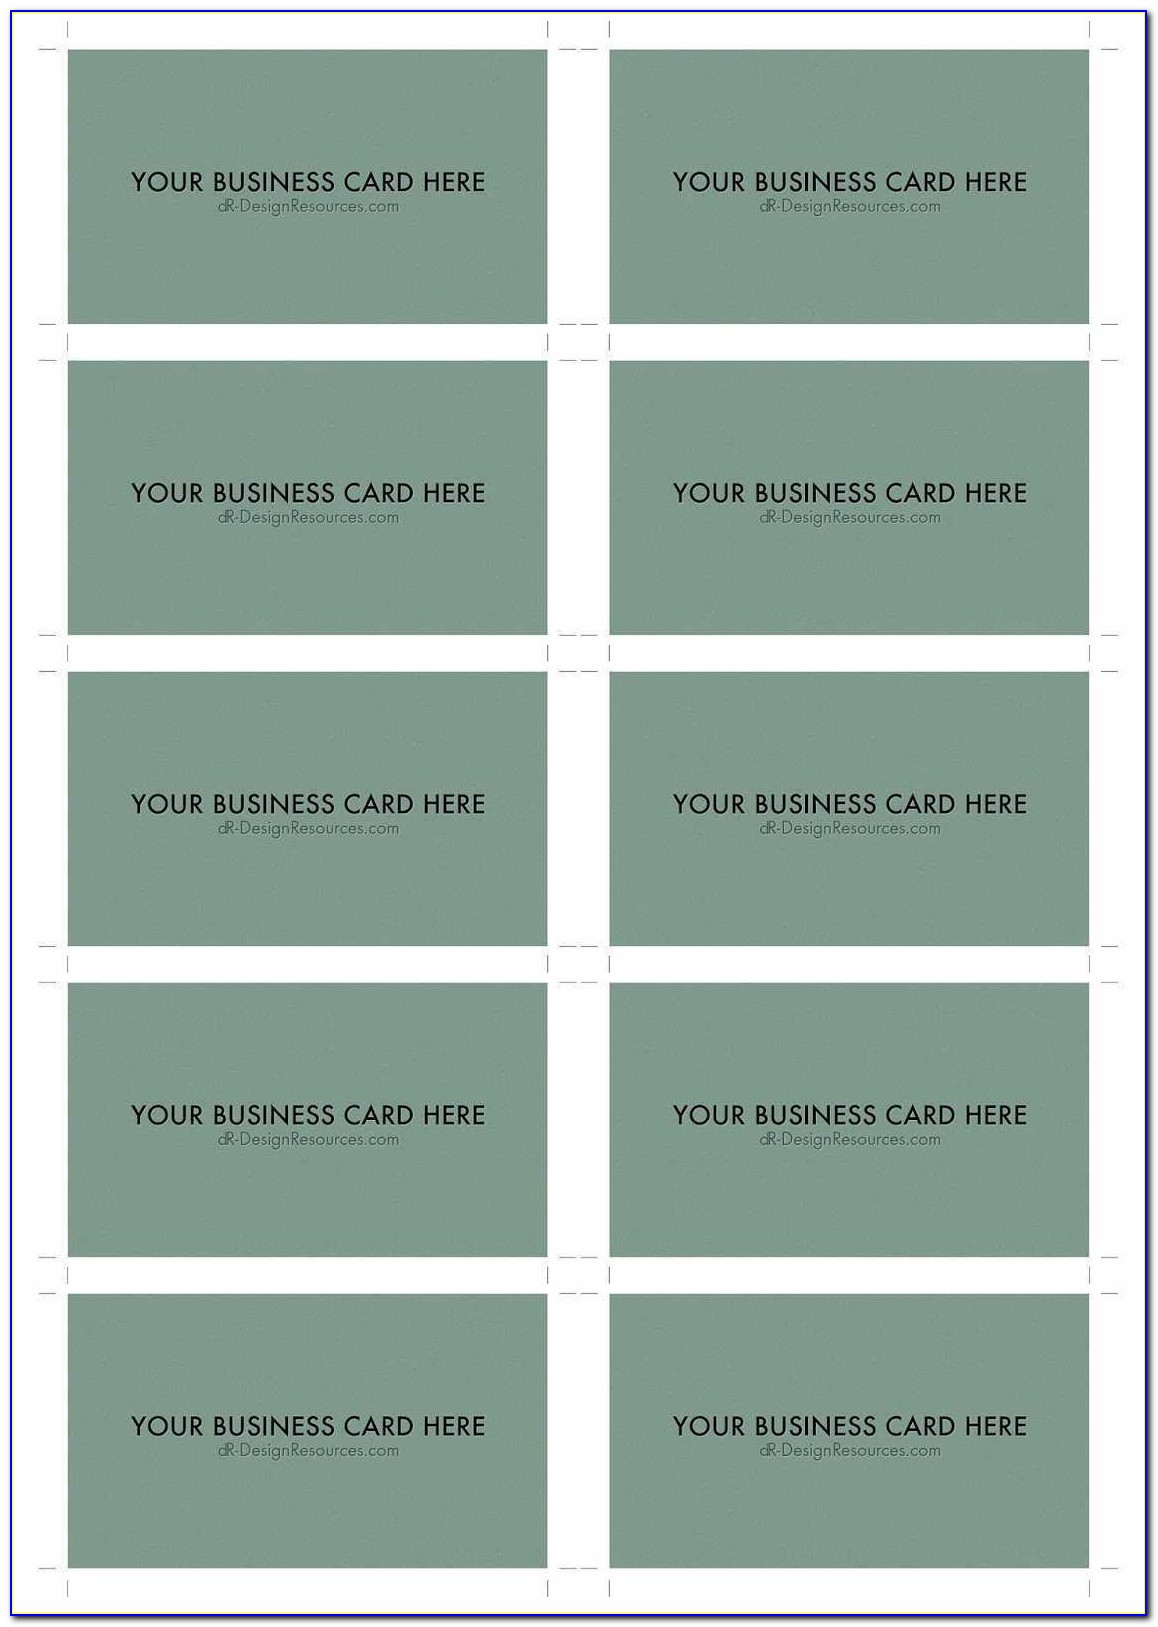 Avery Templates Business Cards 10 Per Sheet Luxury 10 Business Card Template Business Card Design